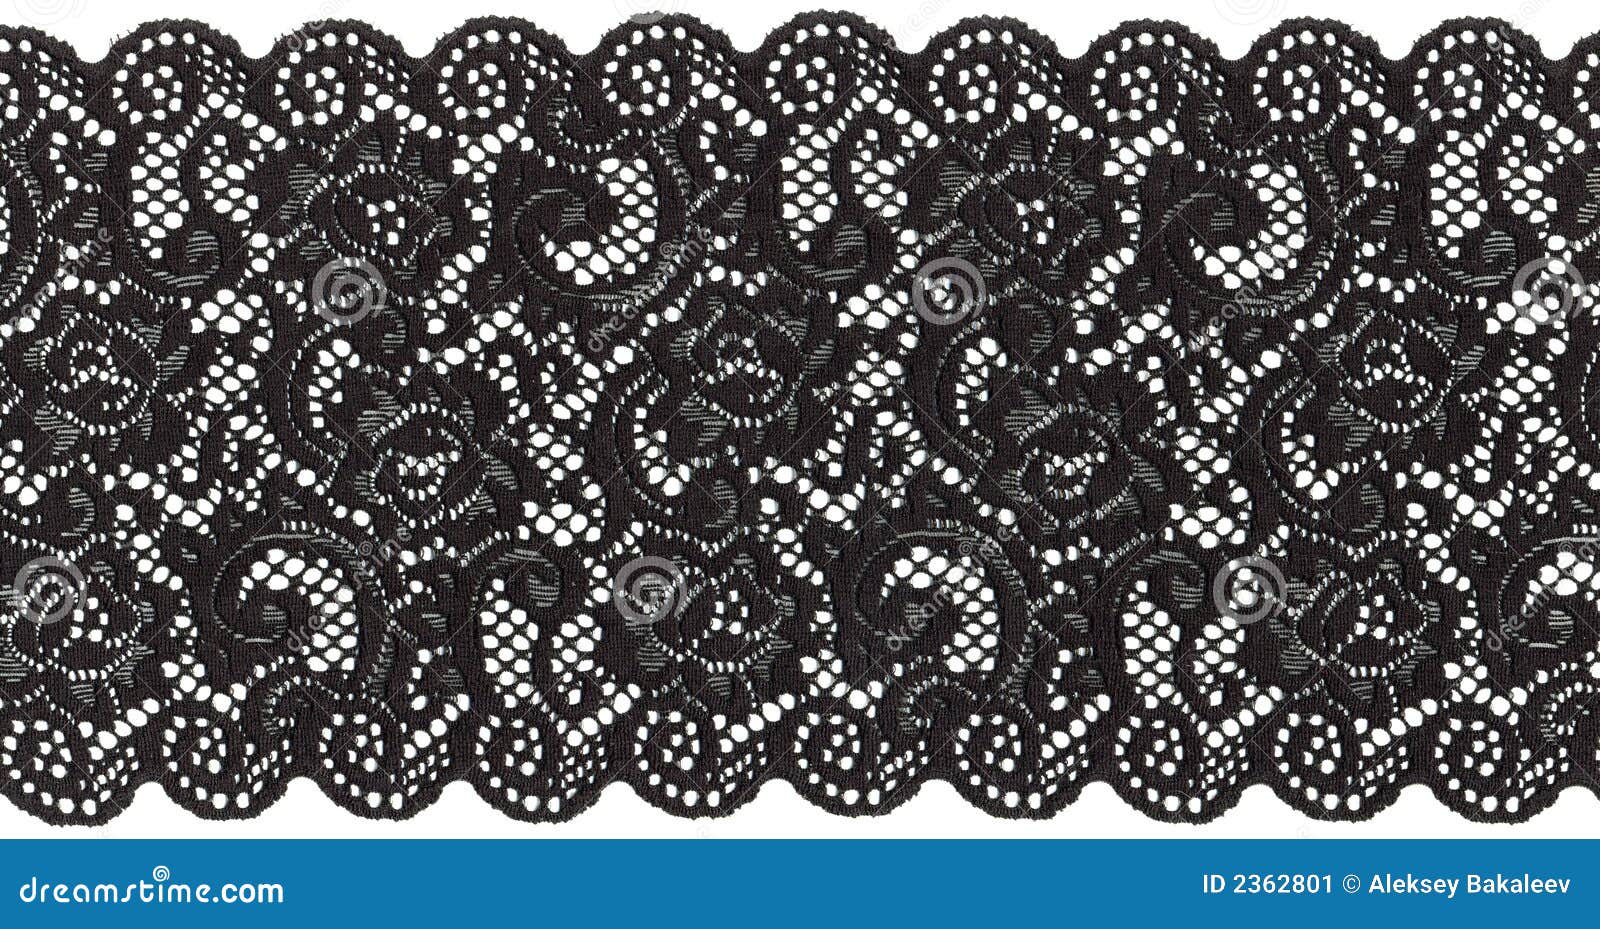 Black Lace Stock Photos ��� 21,177 Black Lace Stock Images, Stock.